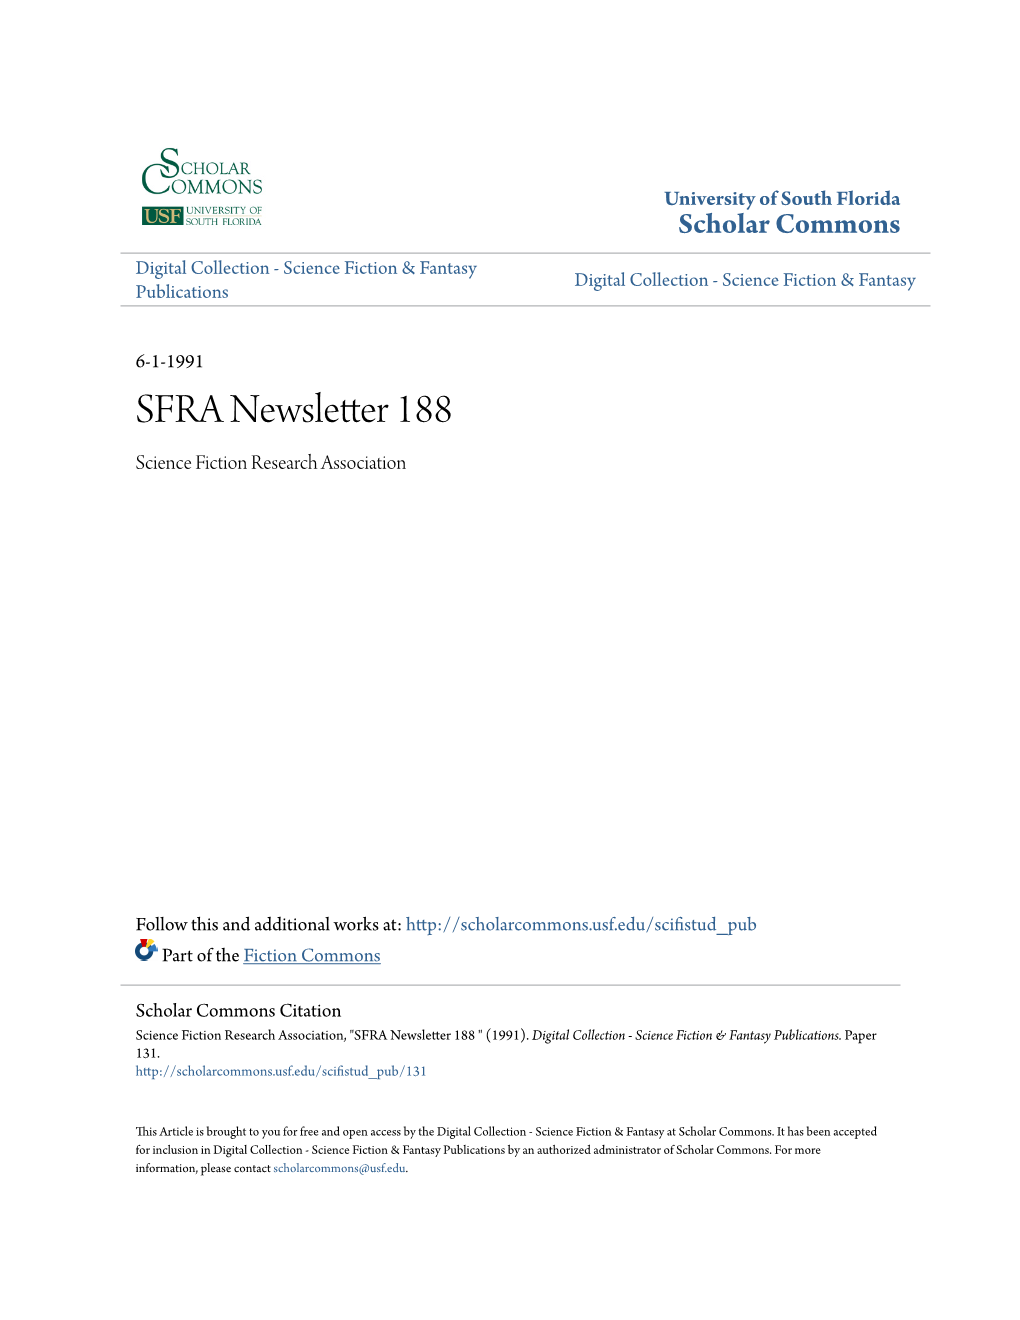 SFRA Newsletter, 188, June 1991 in This Issue: President's Message (Lowentrout)